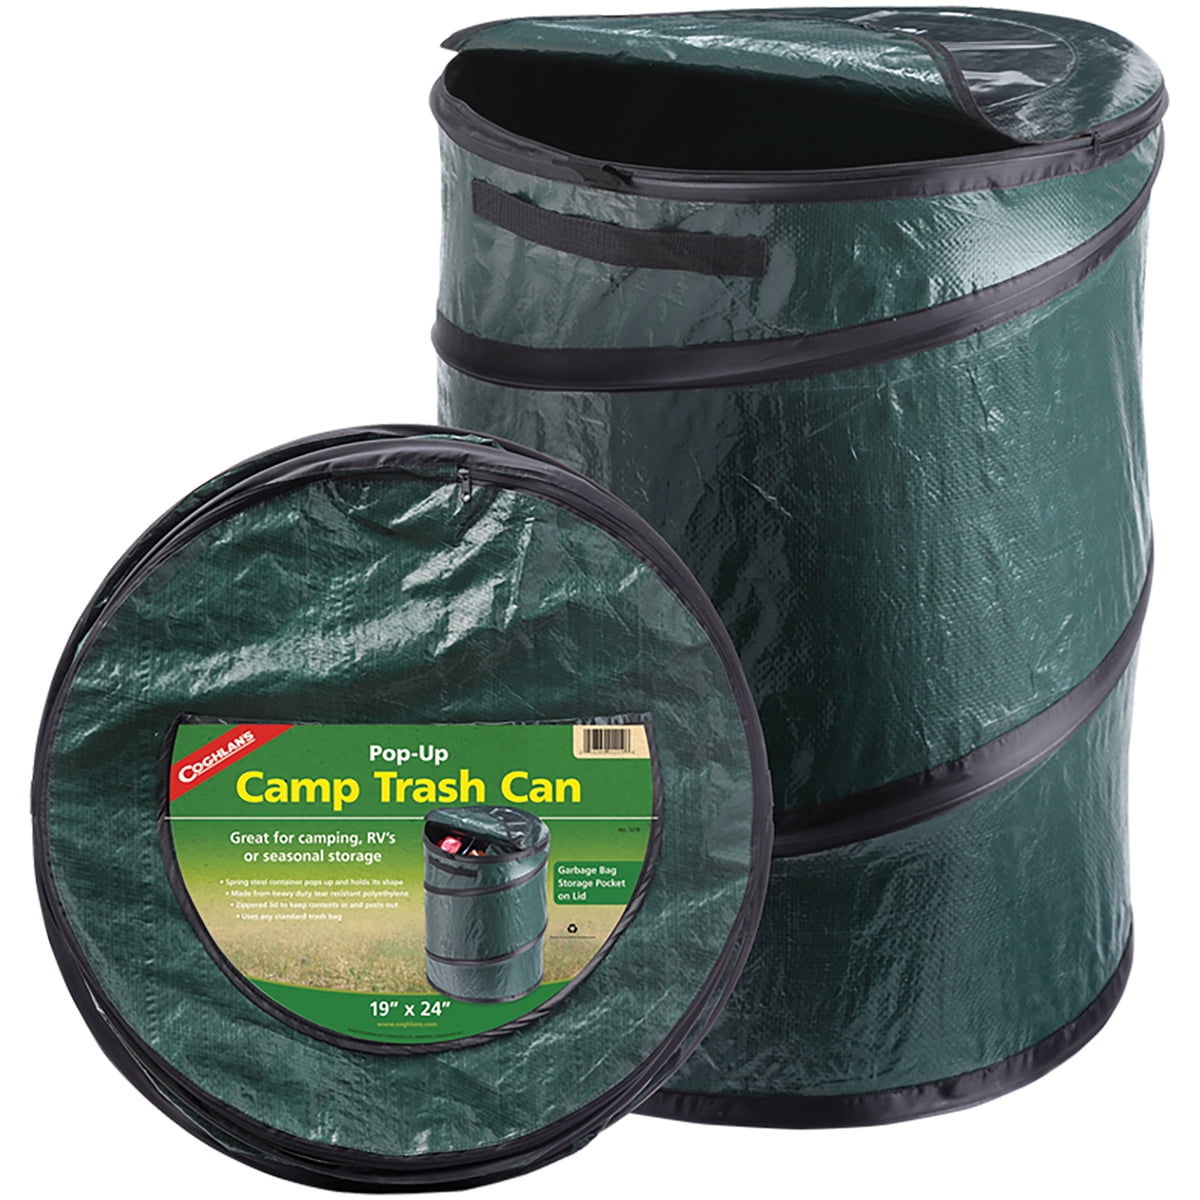 Coghlan's PopUp Camp Trash Can, Portable Collapsible Garbage Bag